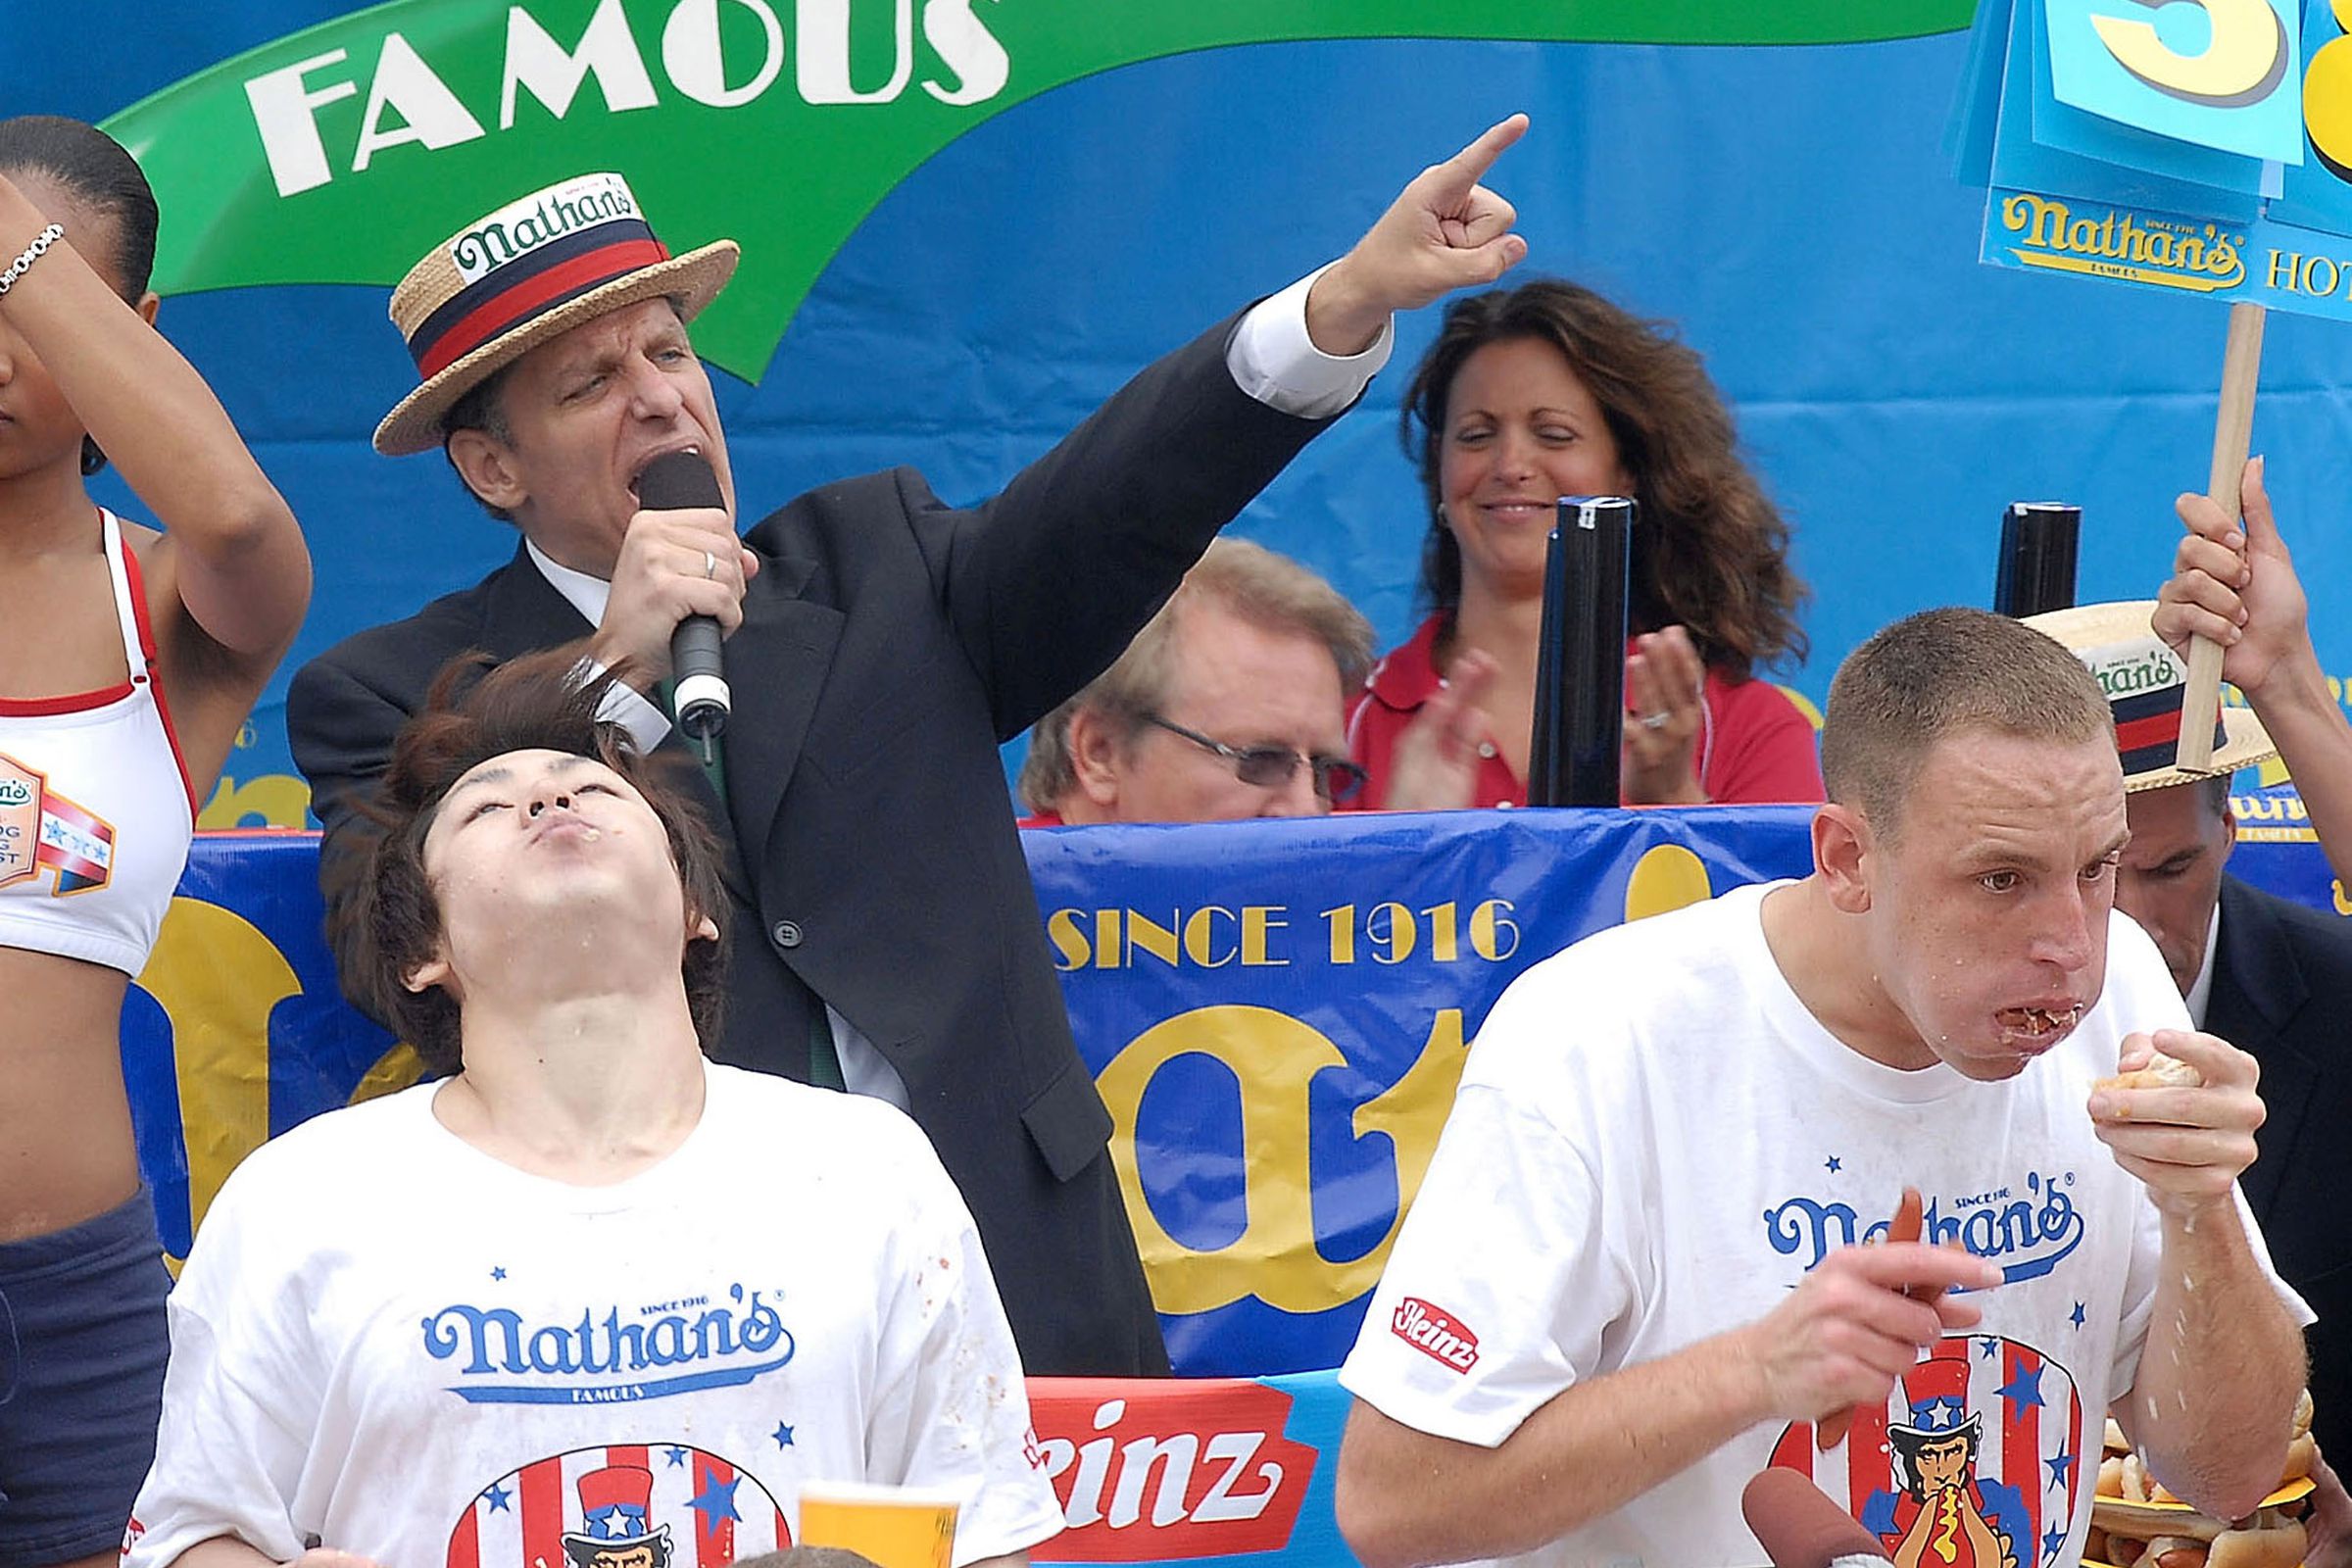 Takeru Kobayashi (L) and Joey Chestnut (R) competed during the 92nd Annual Nathan’s Famous International Hot Dog Eating Contest in 2007.